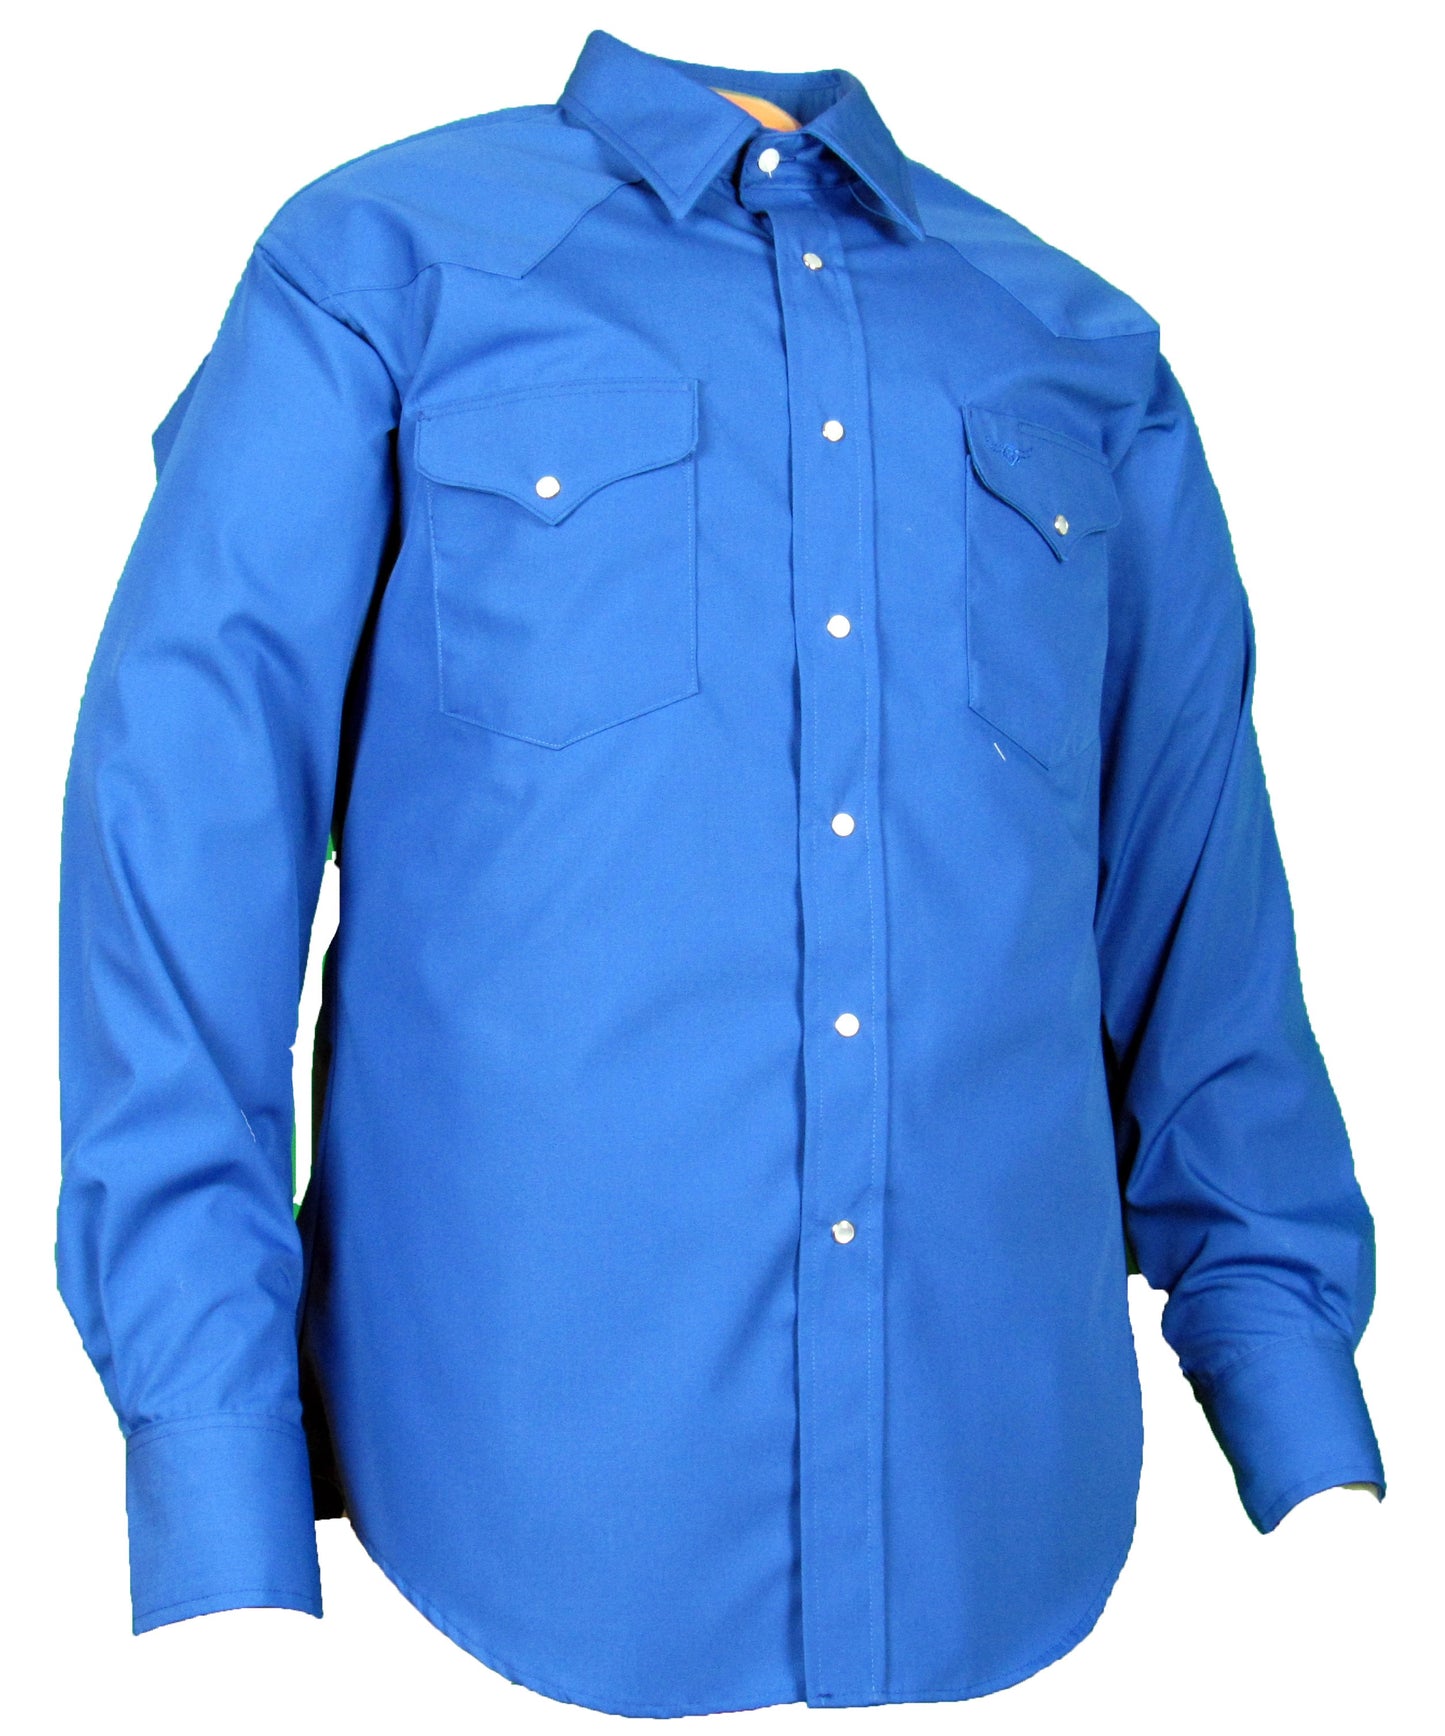 Flying R Ranchwear Rancher Crease shirt in Royal Blue Made in USA with snaps